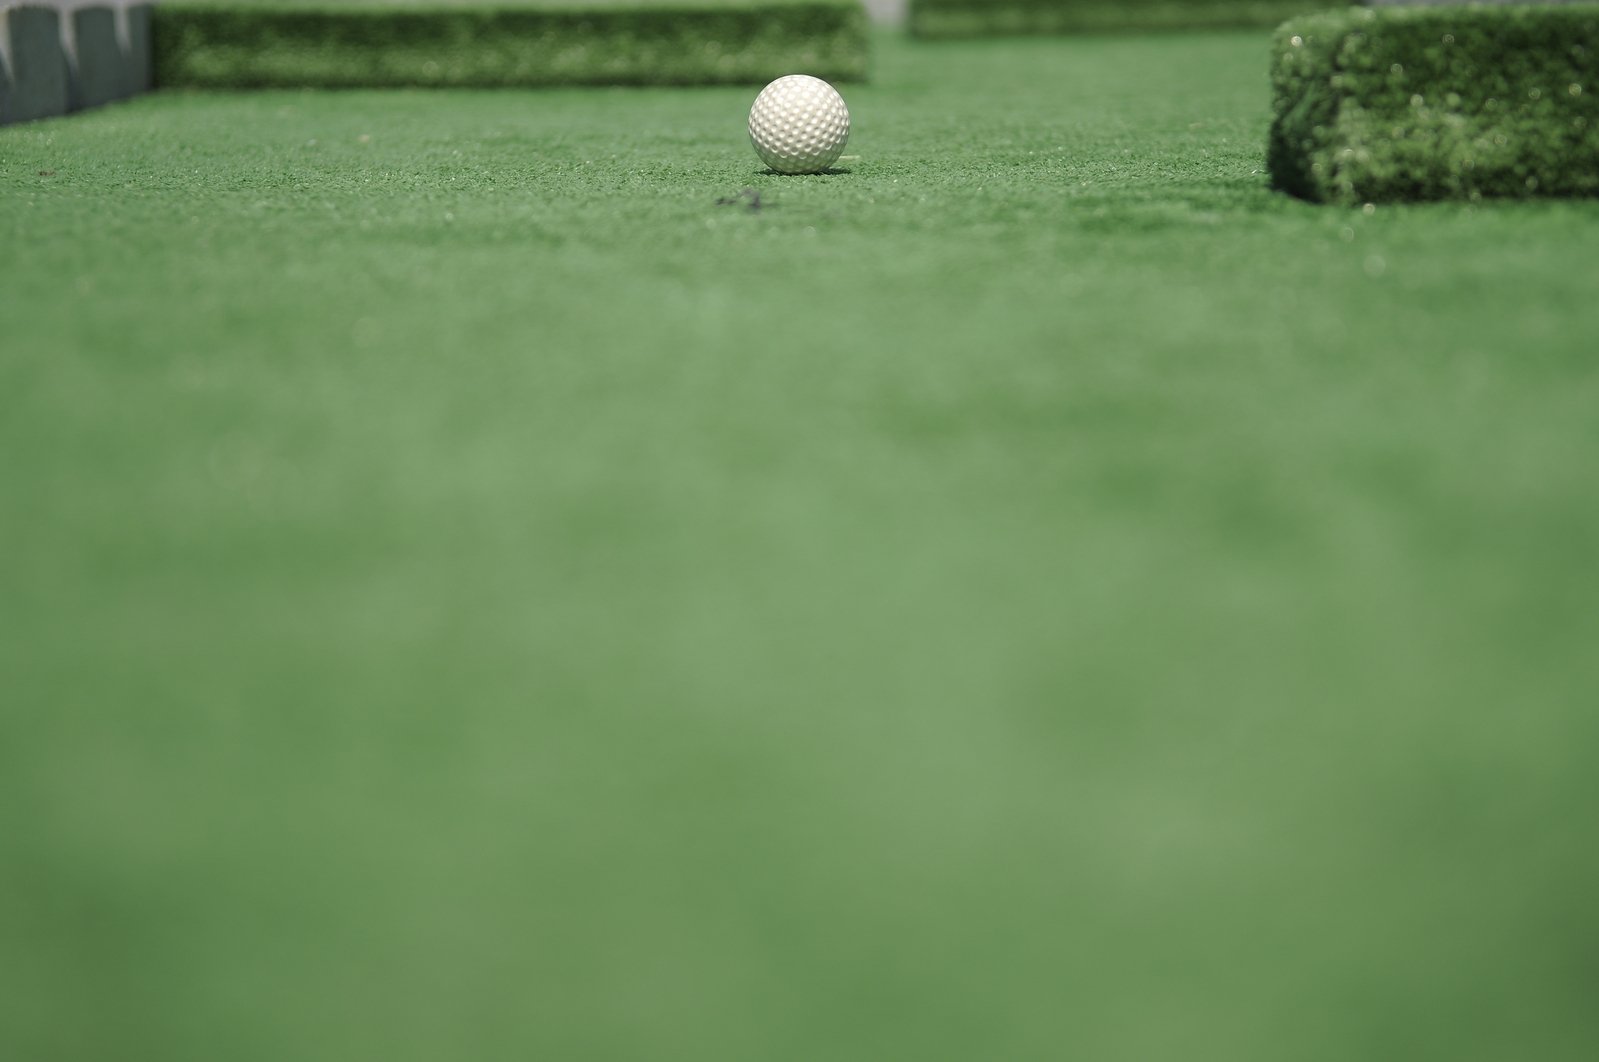 a golf ball sitting on the ground with the tees in focus